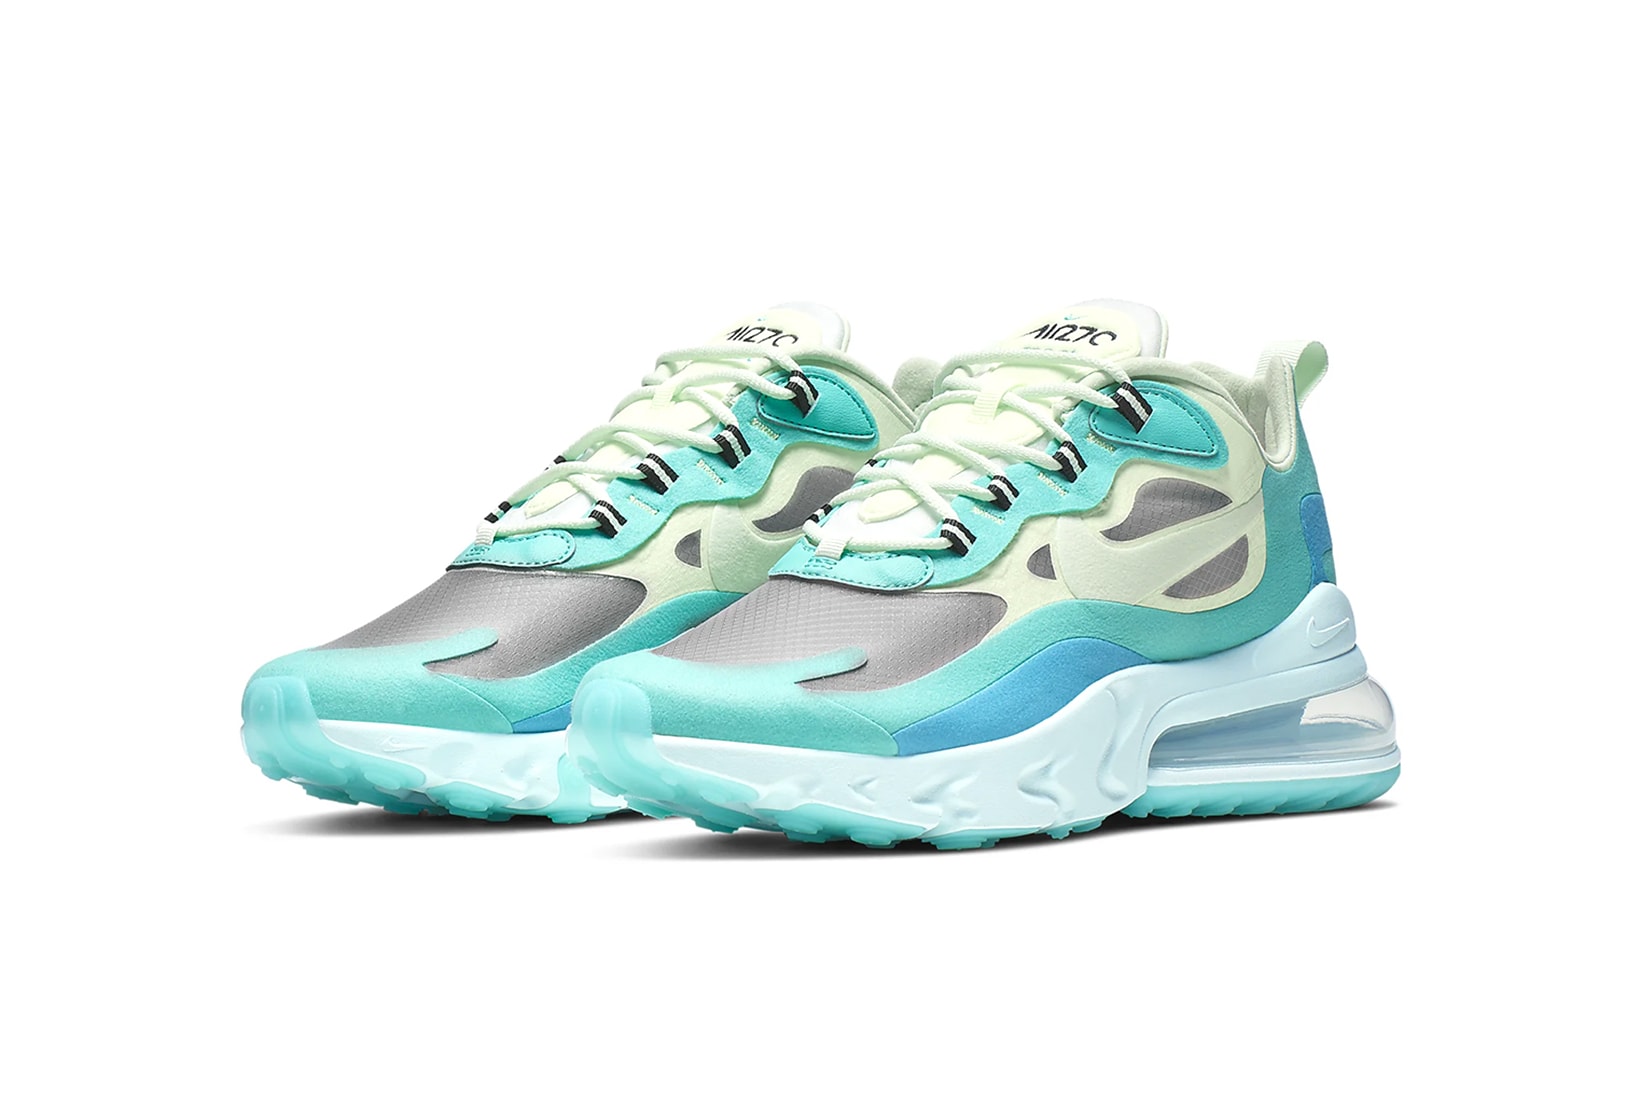 nike air max 270 react hyper jade sneakers footwear shoes sneakerhead barely volt blue lagoon frosted spruce